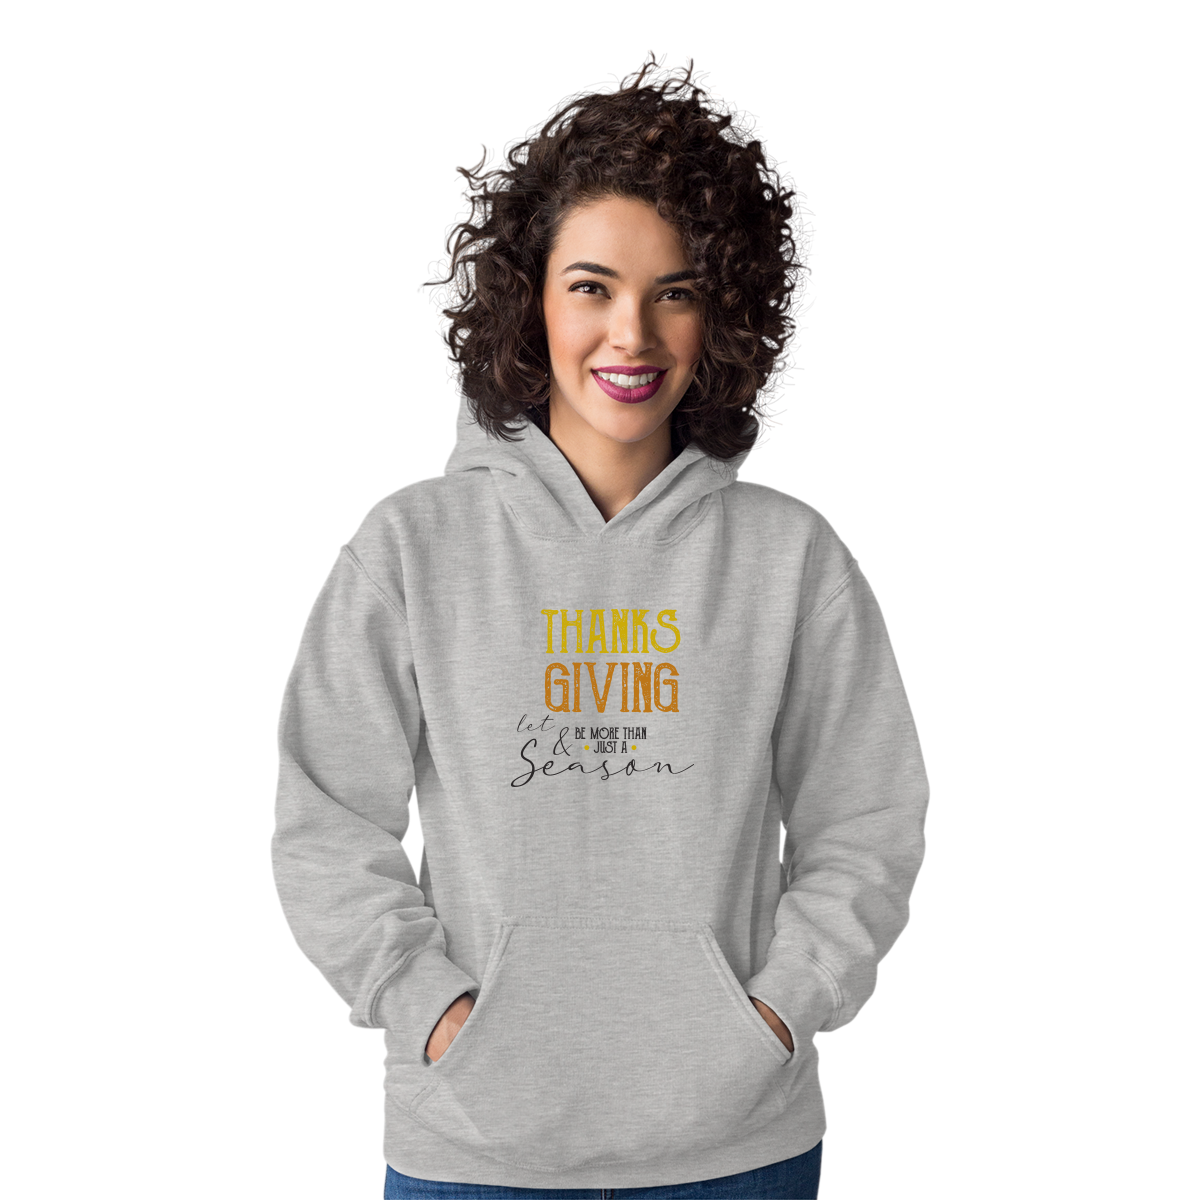 Thanks and Giving  Unisex Hoodie | Gray